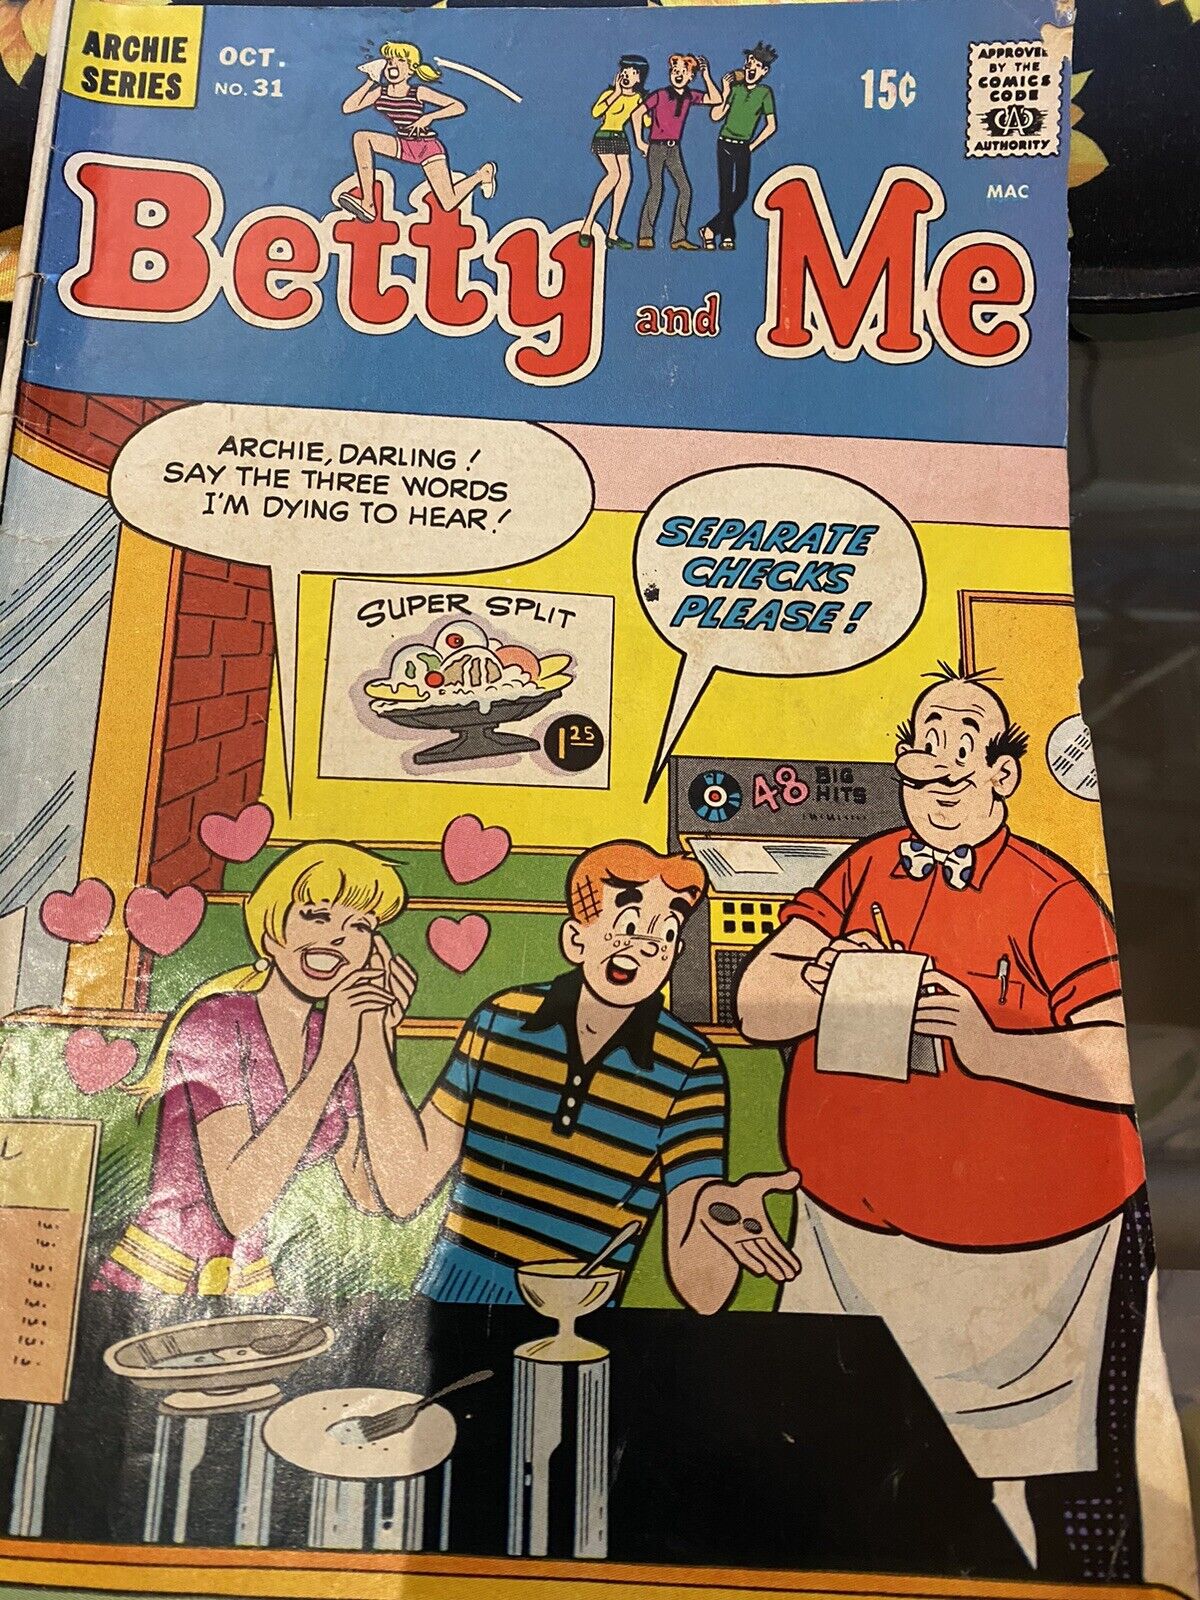 Betty and Me Comic Book, Archie Series No. 31, October 1970.  \